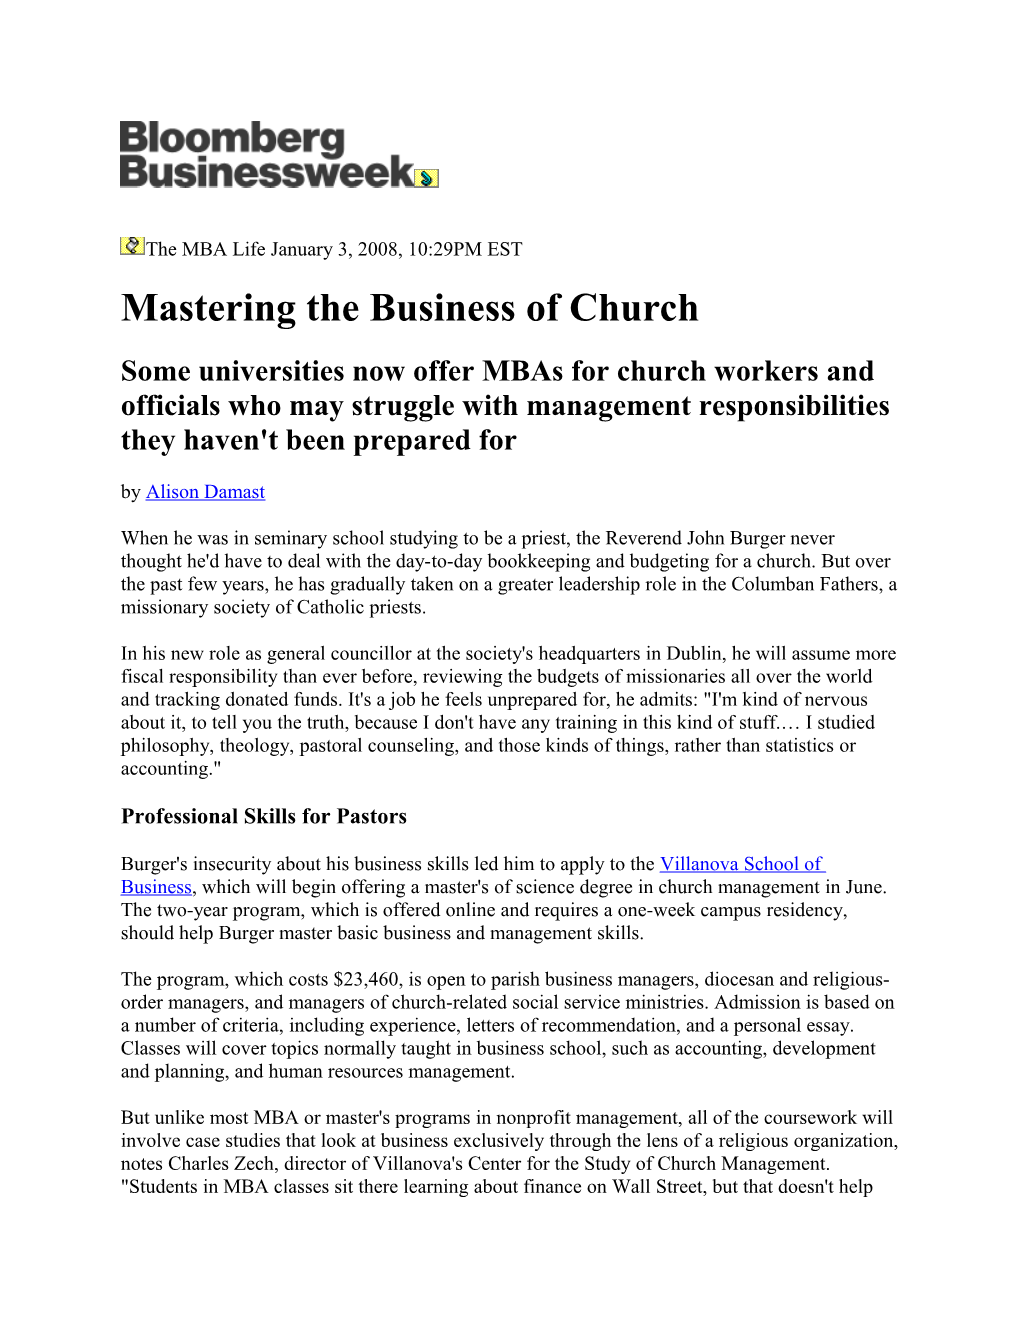 Mastering the Business of Church